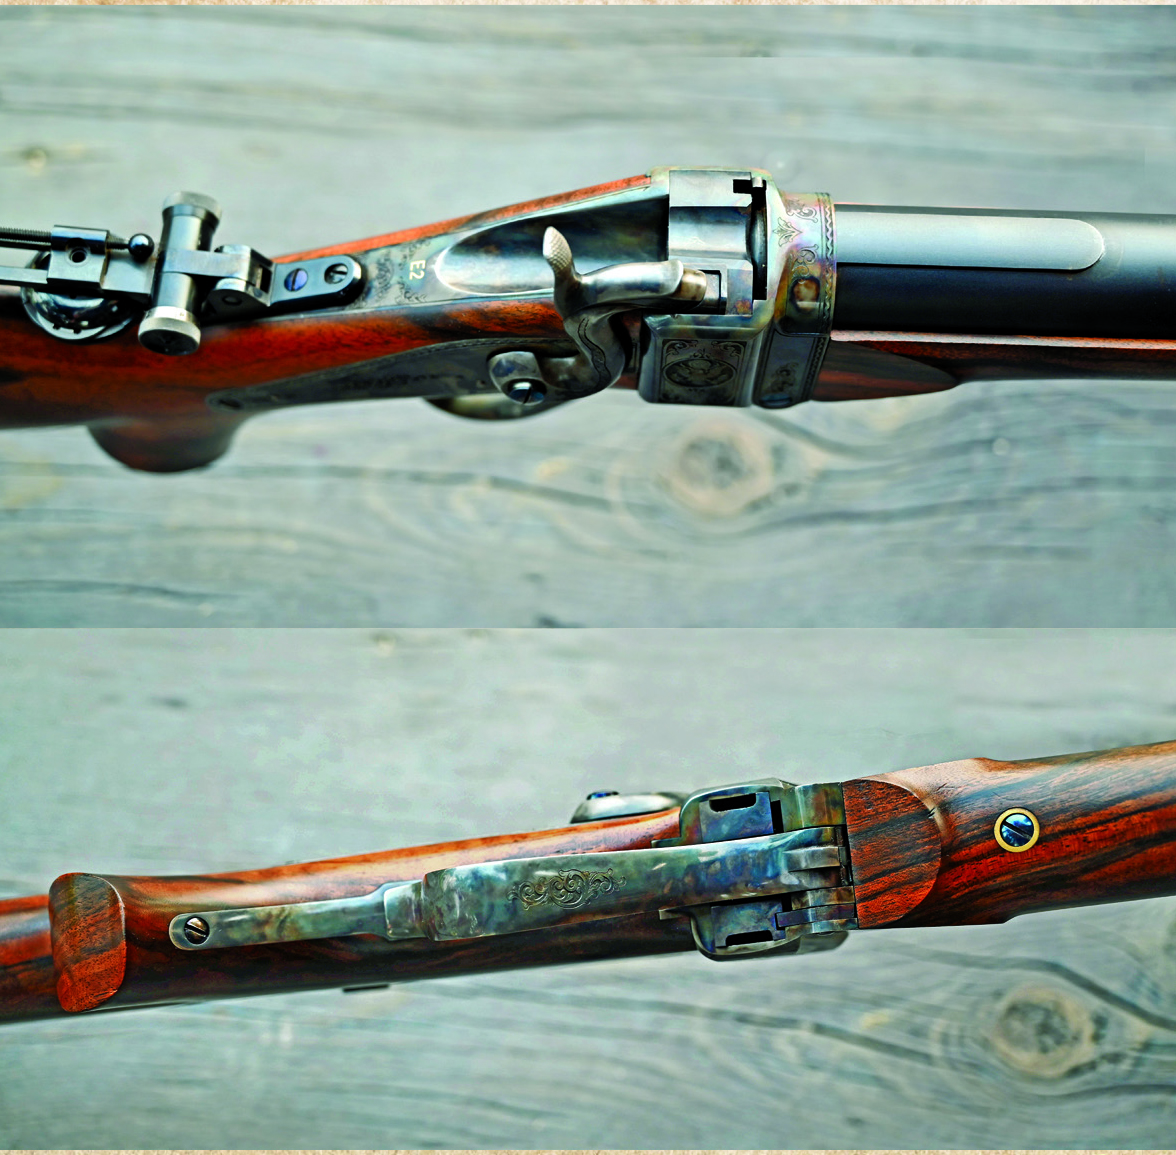 The Rigby flat of the Model 1877 adds a distinctive touch of class to the rifle, as well as the flared side panels of the forearm.